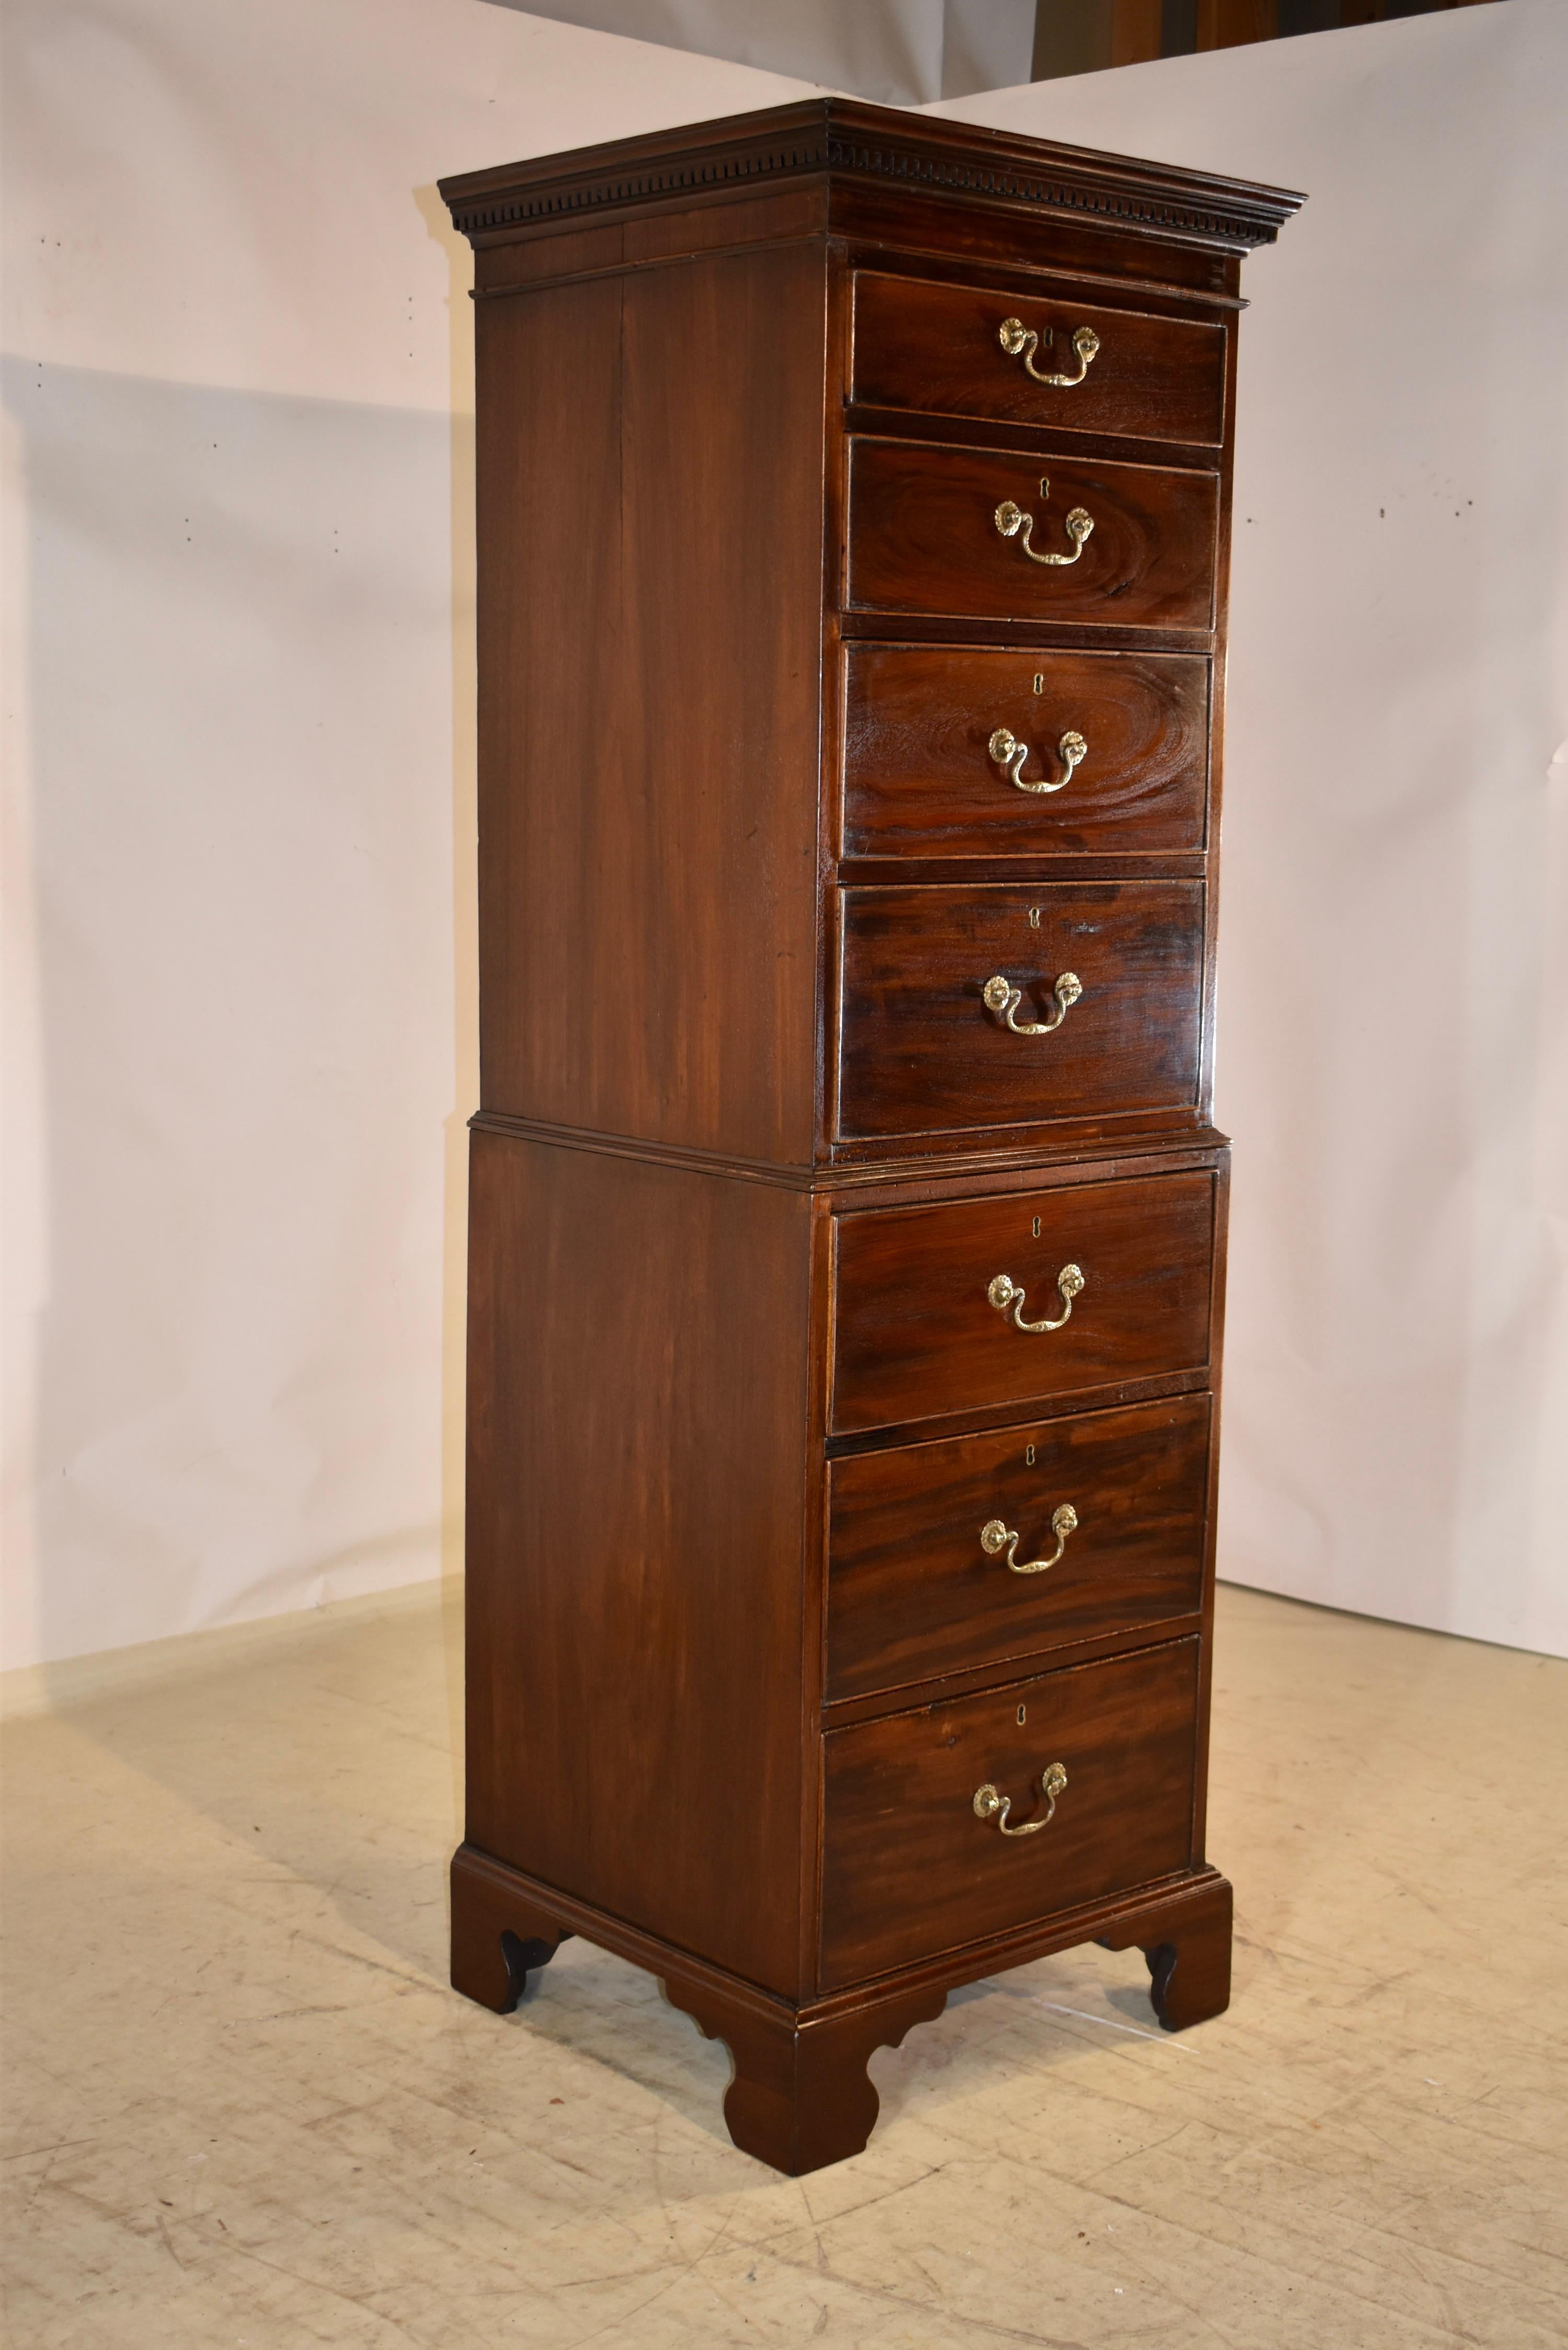 Late 18th or early 19th century English single tall chest made from mahogany.  The top has a crown over a dentil molding, following down to simple sides.  The front of the case has four over three drawers.  The chest is made in two pieces, for easy